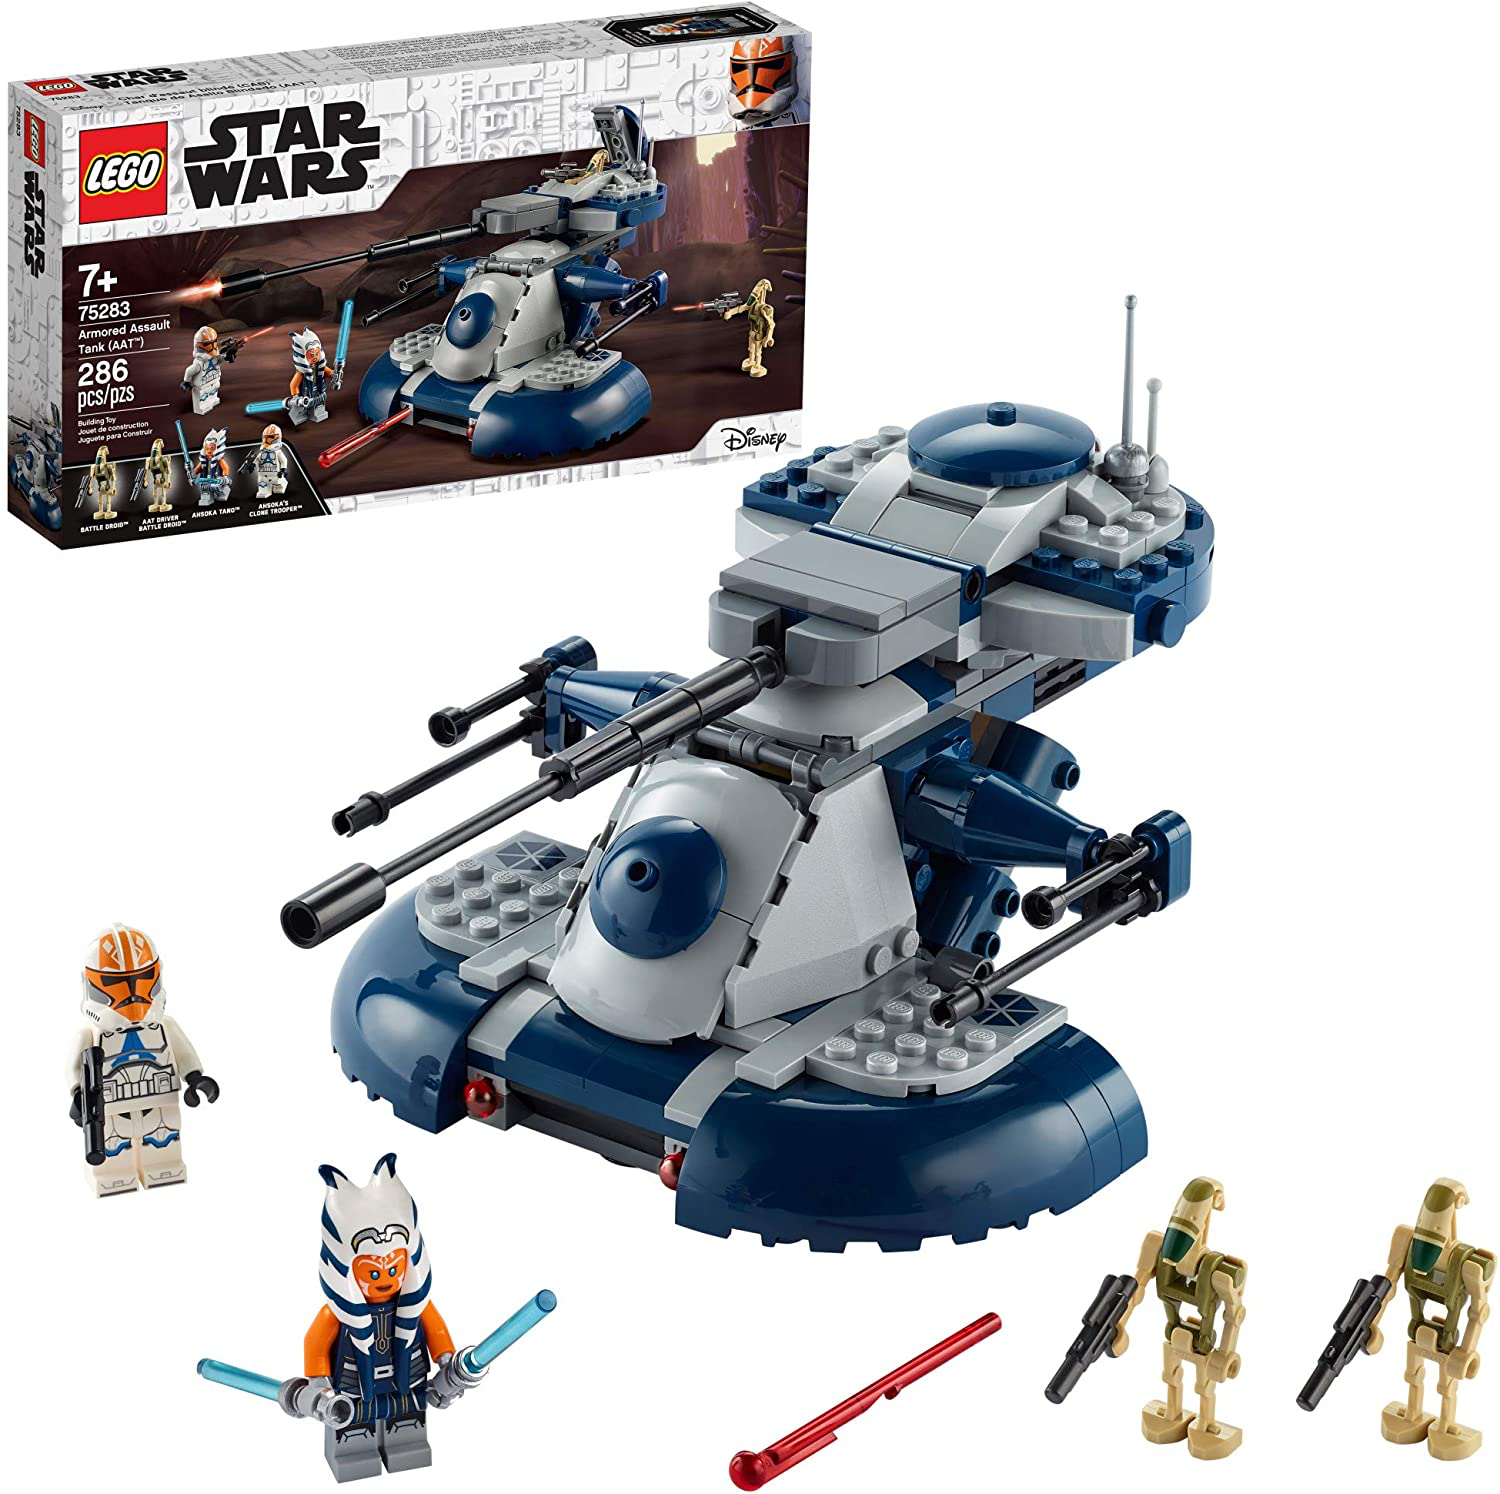 New Clone Wars Armored Assault Tank (AAT) Lego Set available now! | The ...